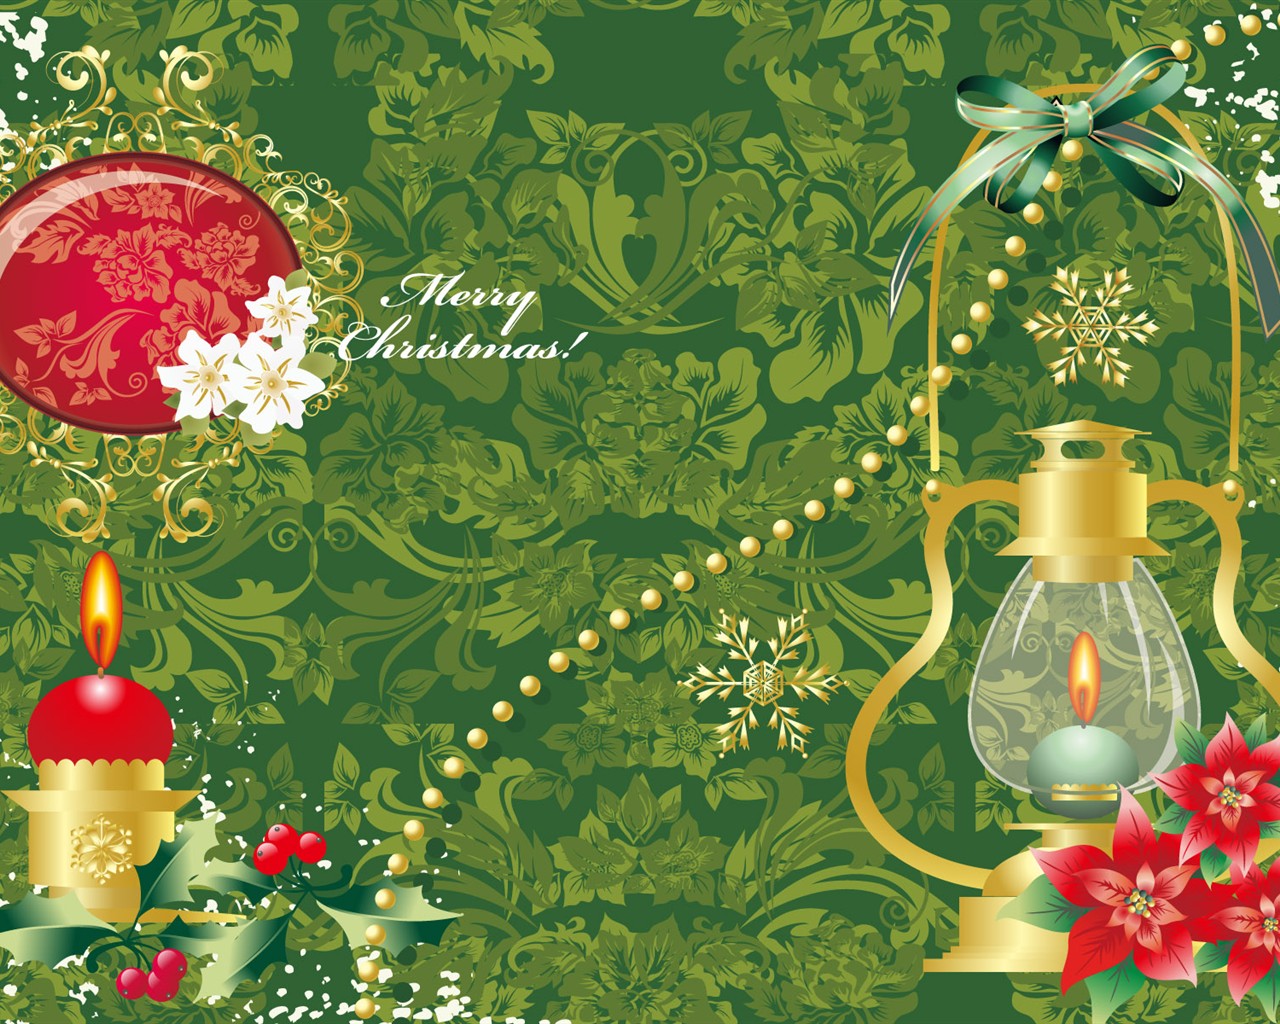 Exquisite Christmas Theme HD Wallpapers #23 - 1280x1024